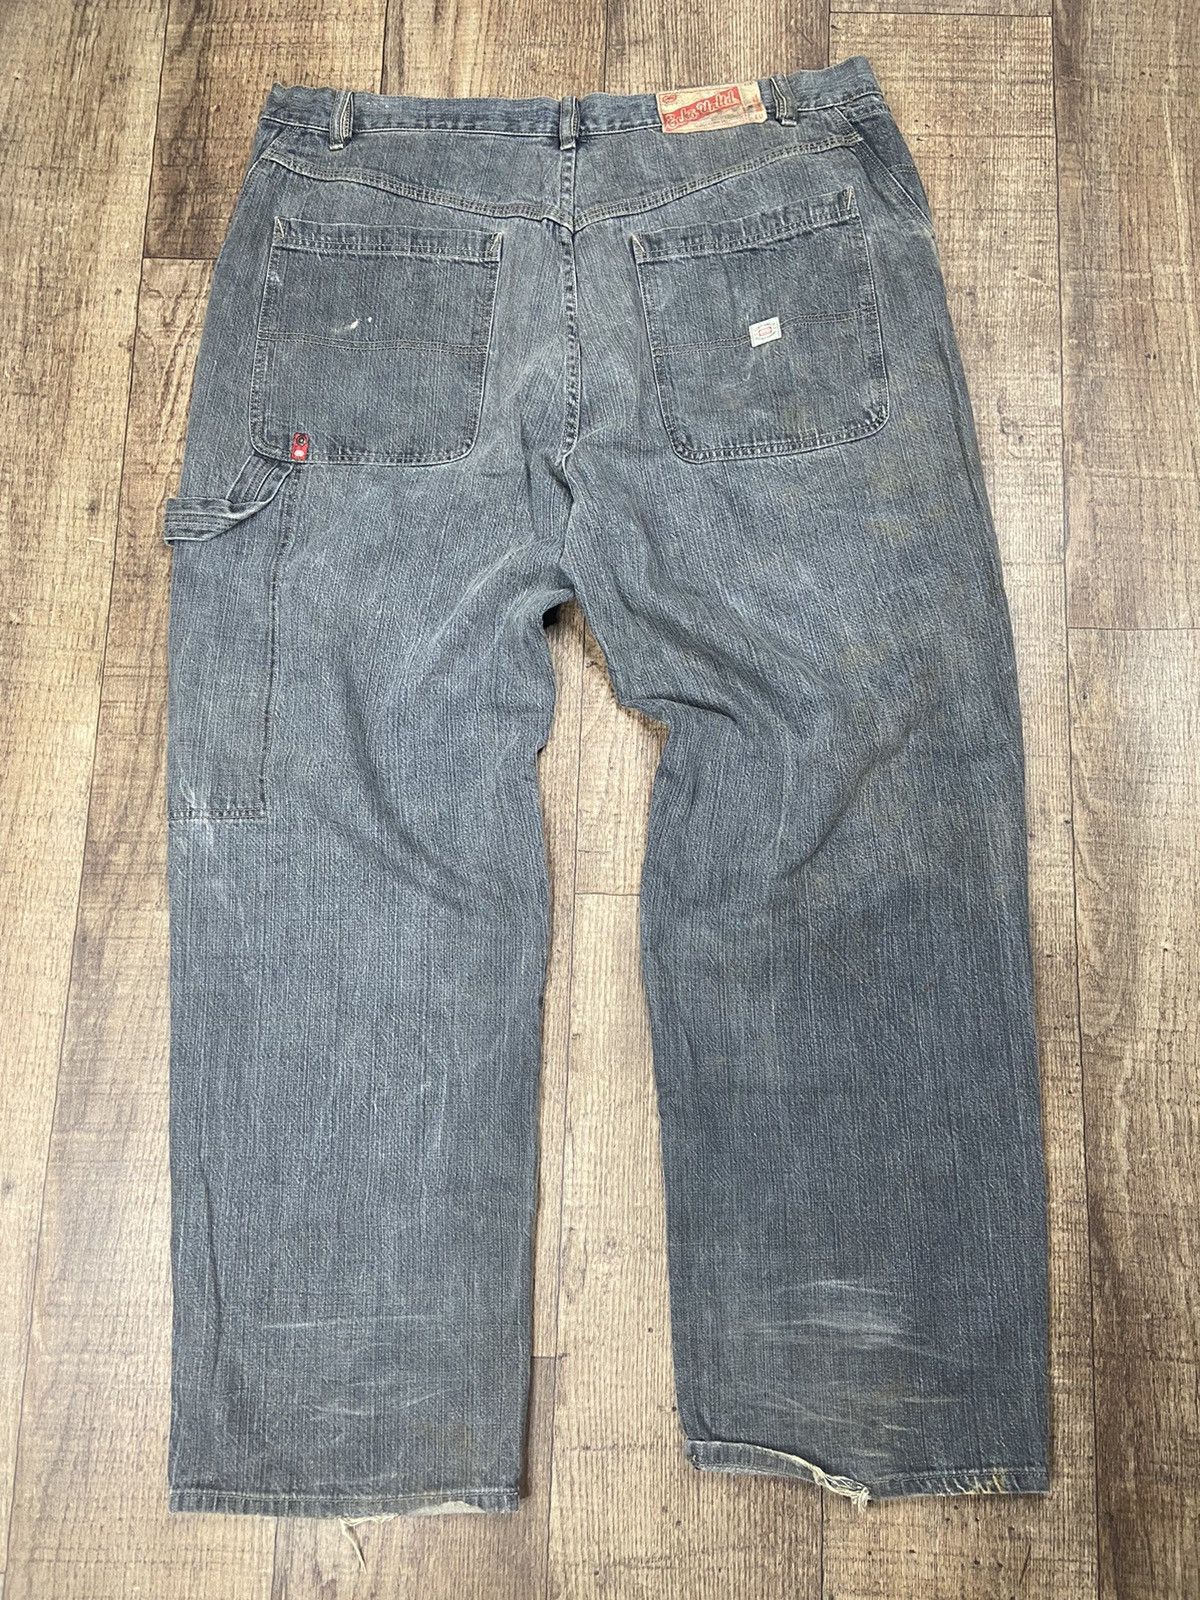 Vintage Crazy Vintage Baggy Y2K Faded JNCO Style Affliction Jeans | Grailed